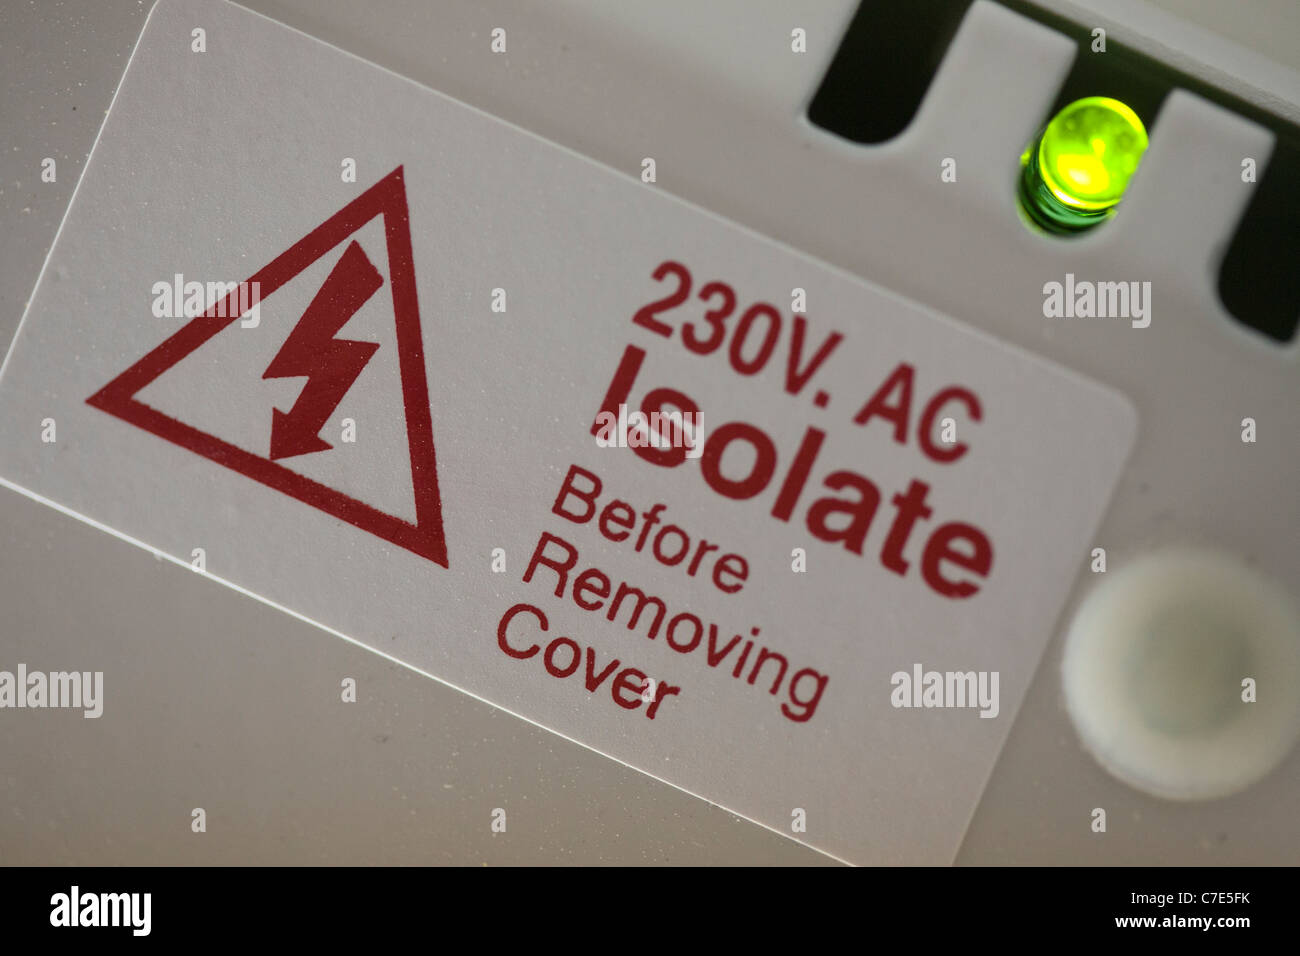 Isolate before removing Cover  Electrical Label and glowing Diode 230v AV Stock Photo